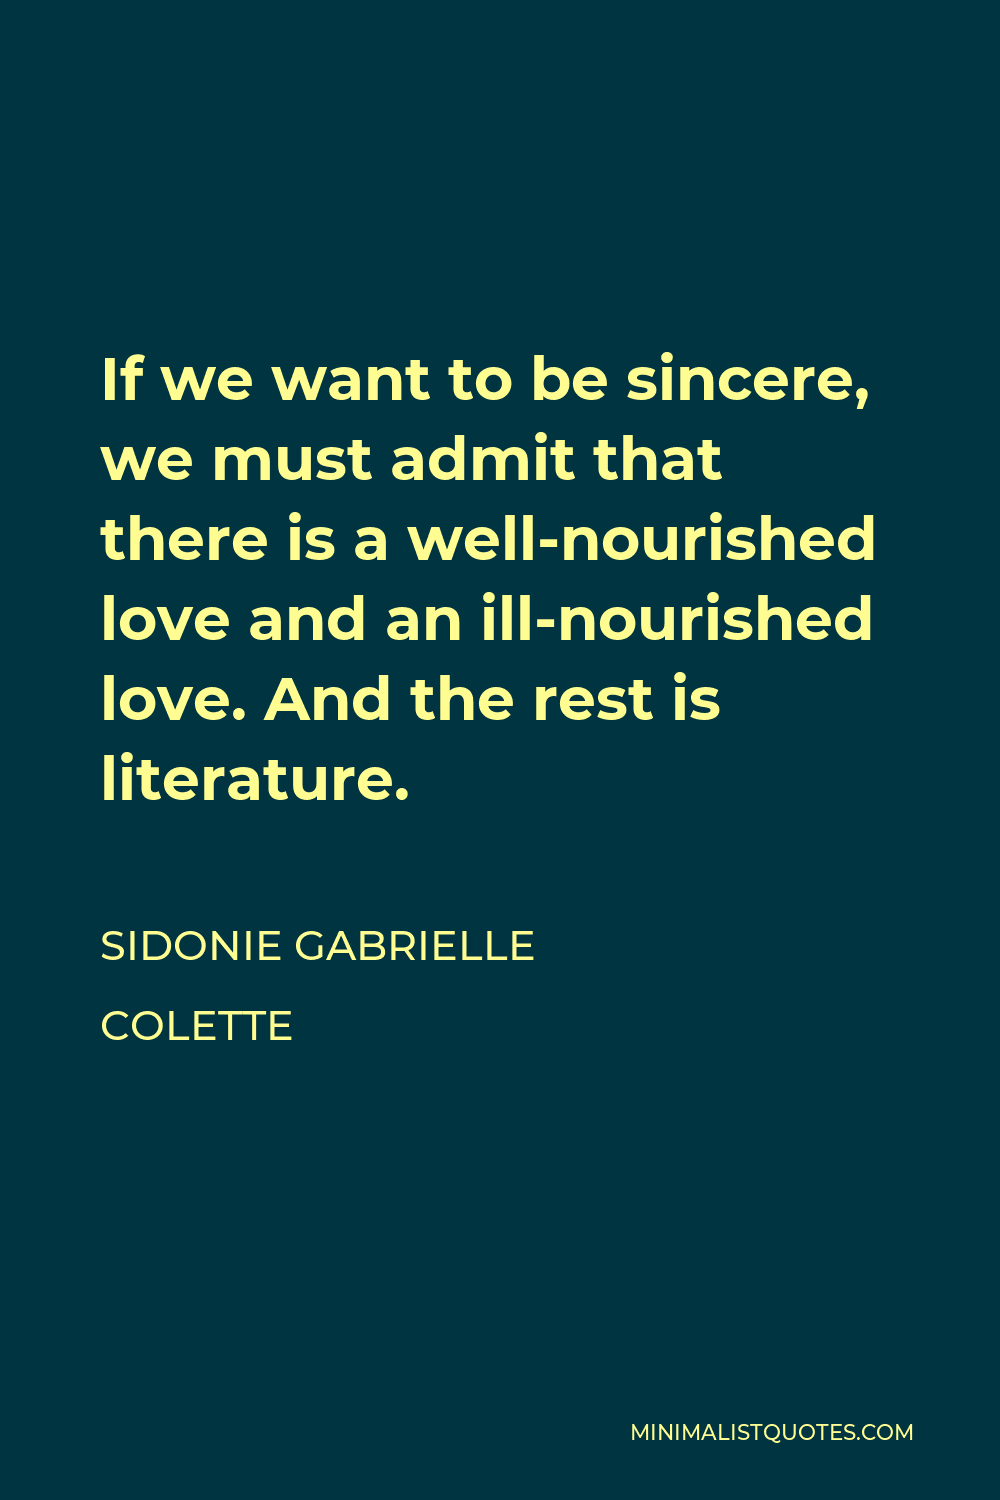 Sidonie Gabrielle Colette Quote - If we want to be sincere, we must admit that there is a well-nourished love and an ill-nourished love. And the rest is literature.